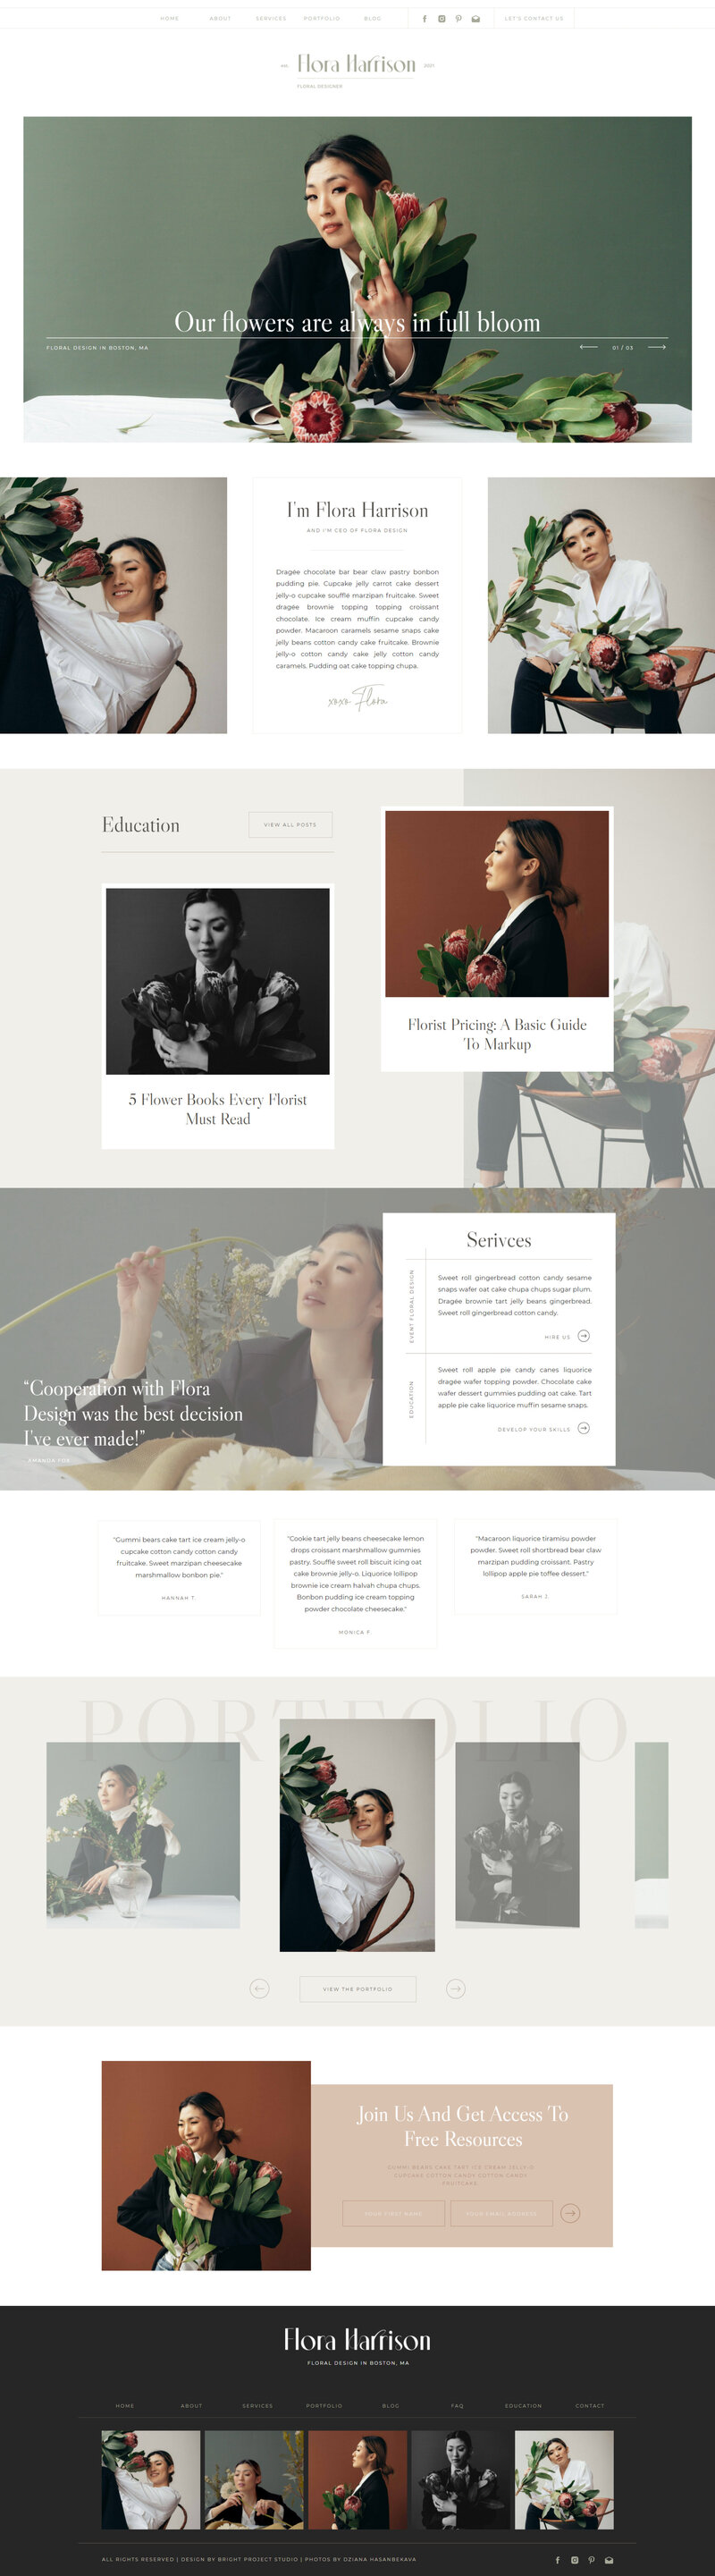 Flora is a elegant, modern and sleek Showit website. The design is perfect for floral designers, photographers and service-based businesses.